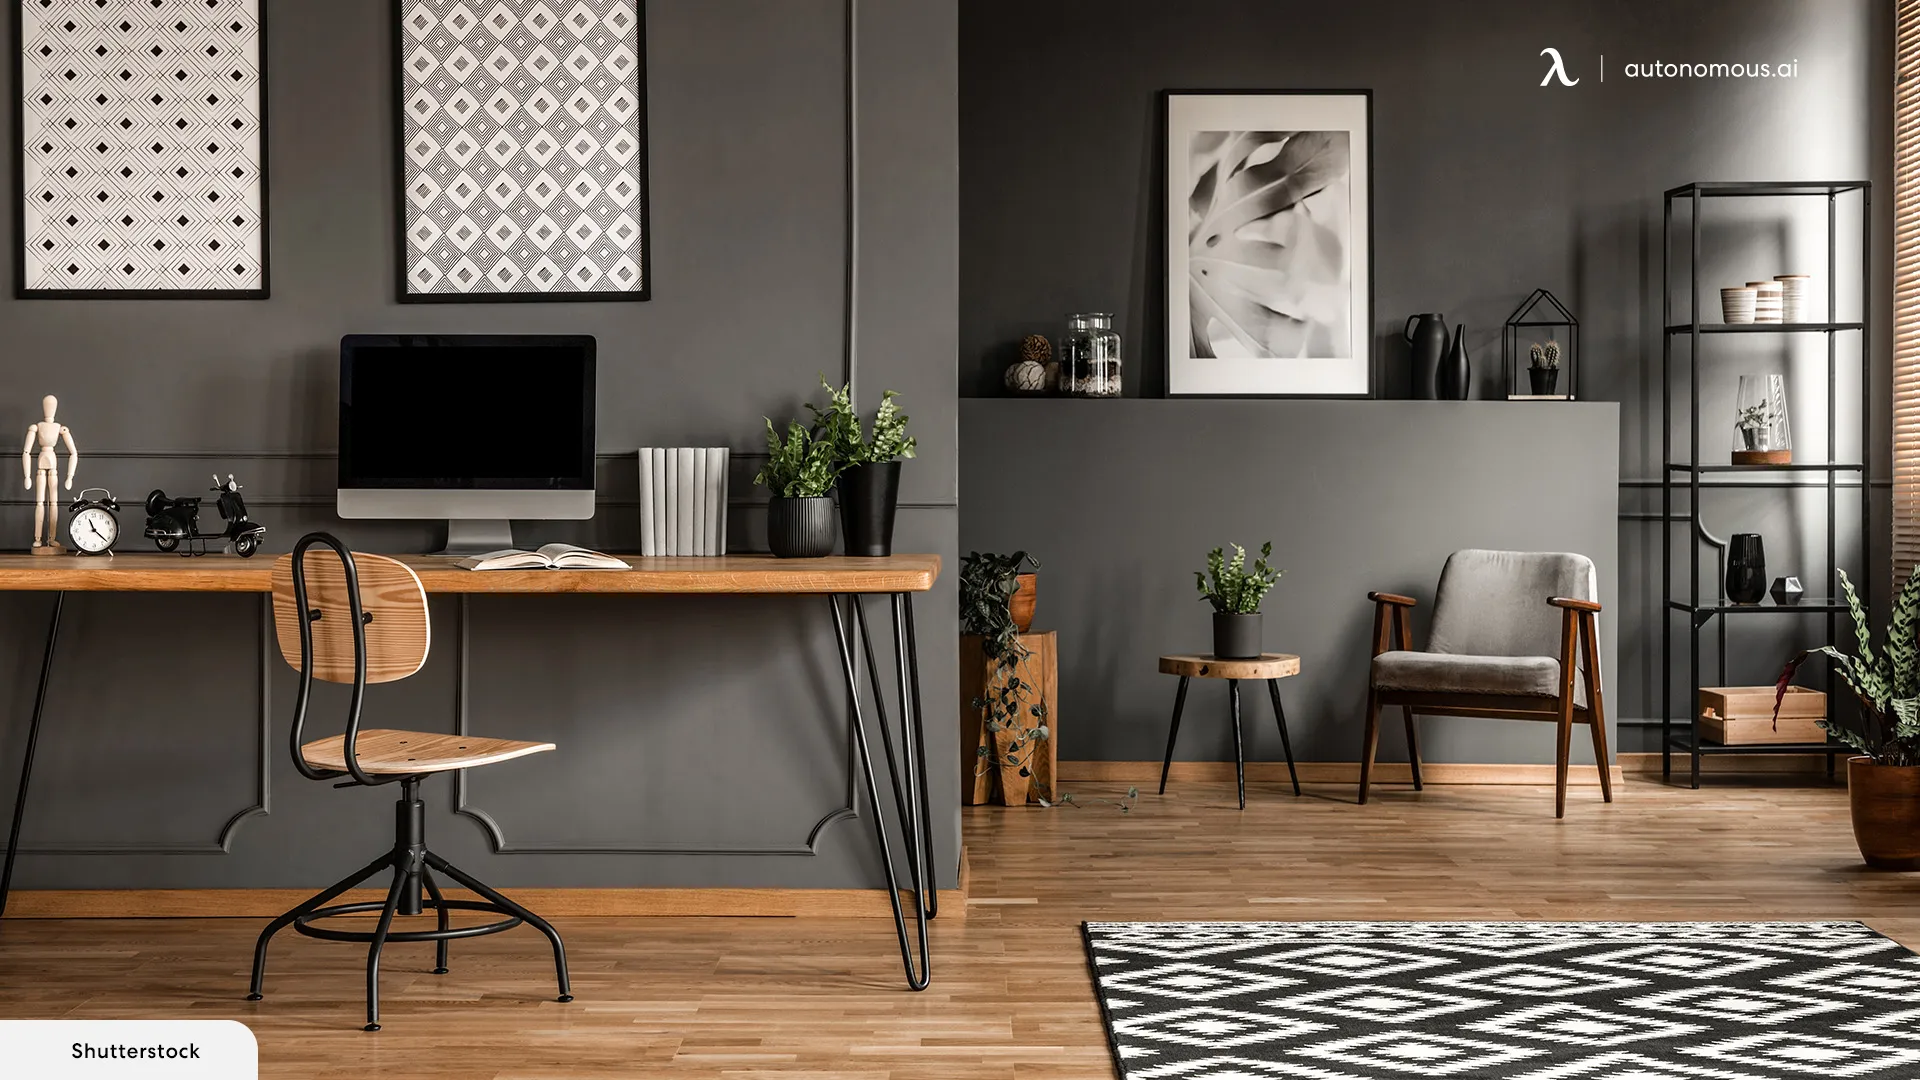 Seven Awesome Dark Office Ideas for a Moody Home Workspace Vibe